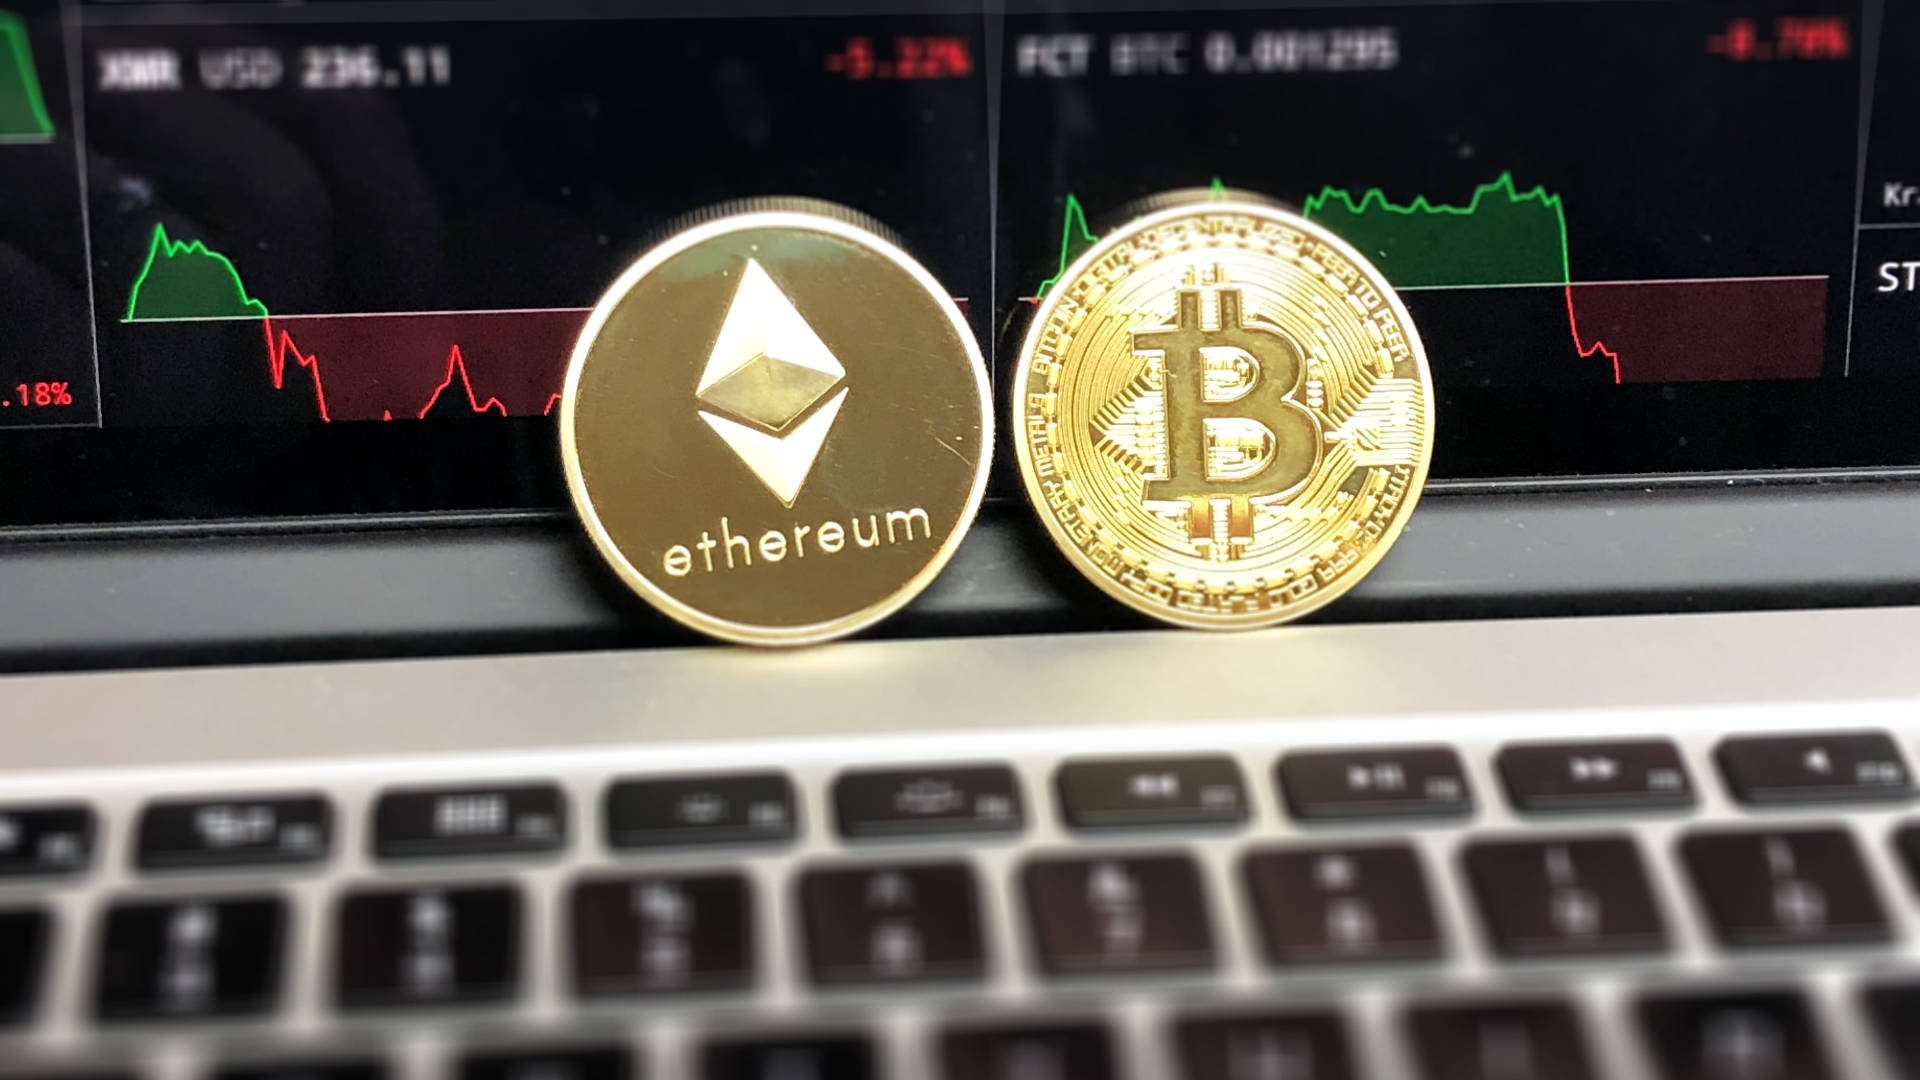 Ethereum And Bitcoin On Laptop Wallpaper